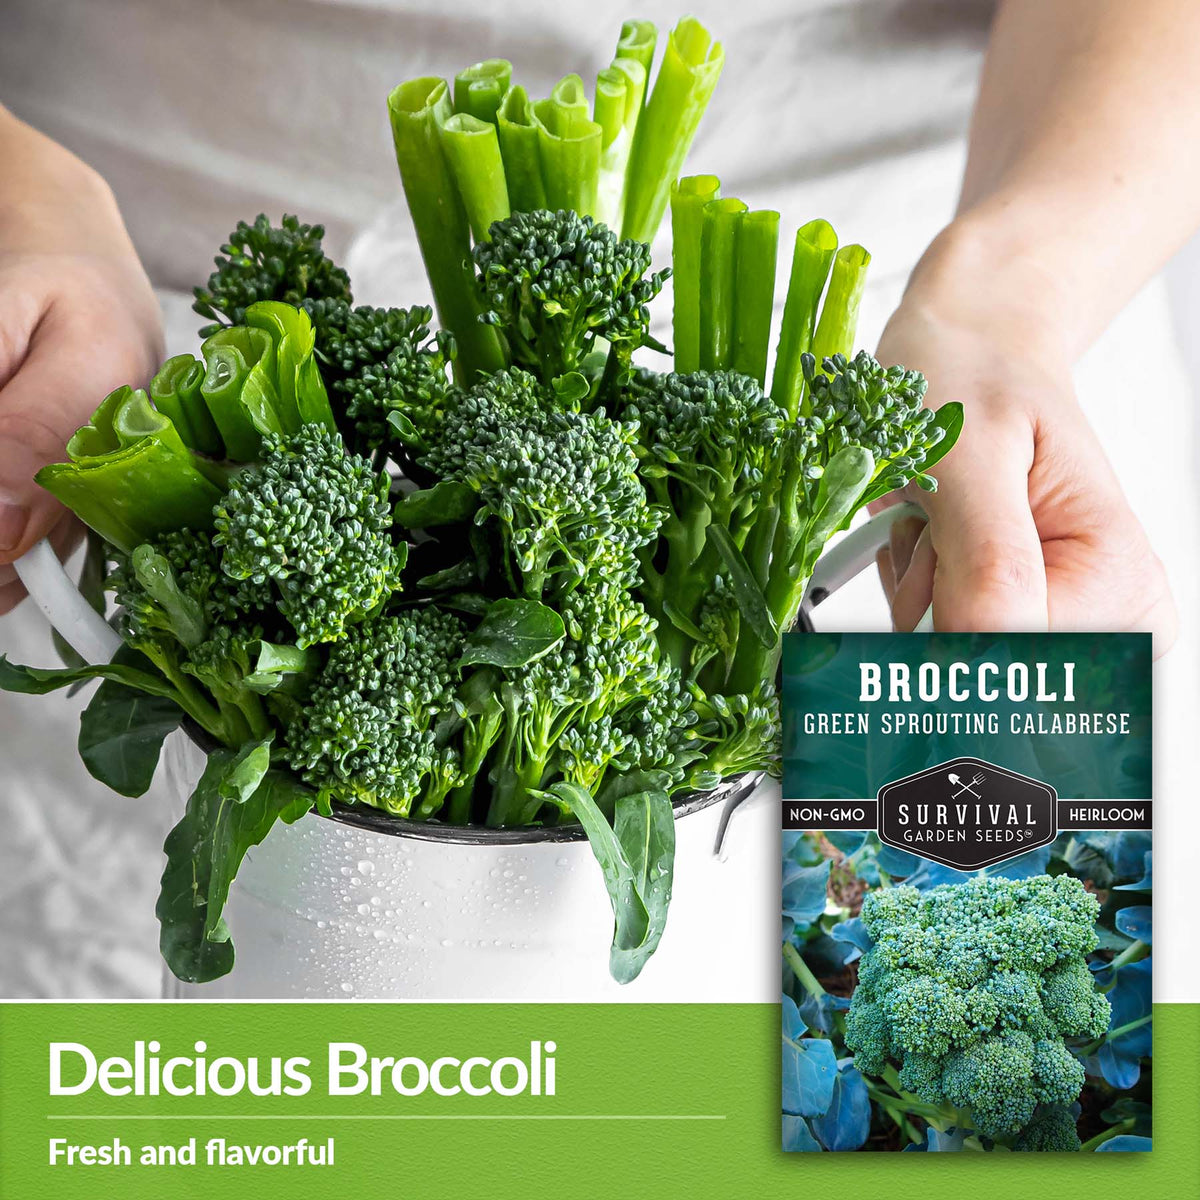 Green Sprouting Calabrese Broccoli is fresh and flavorful